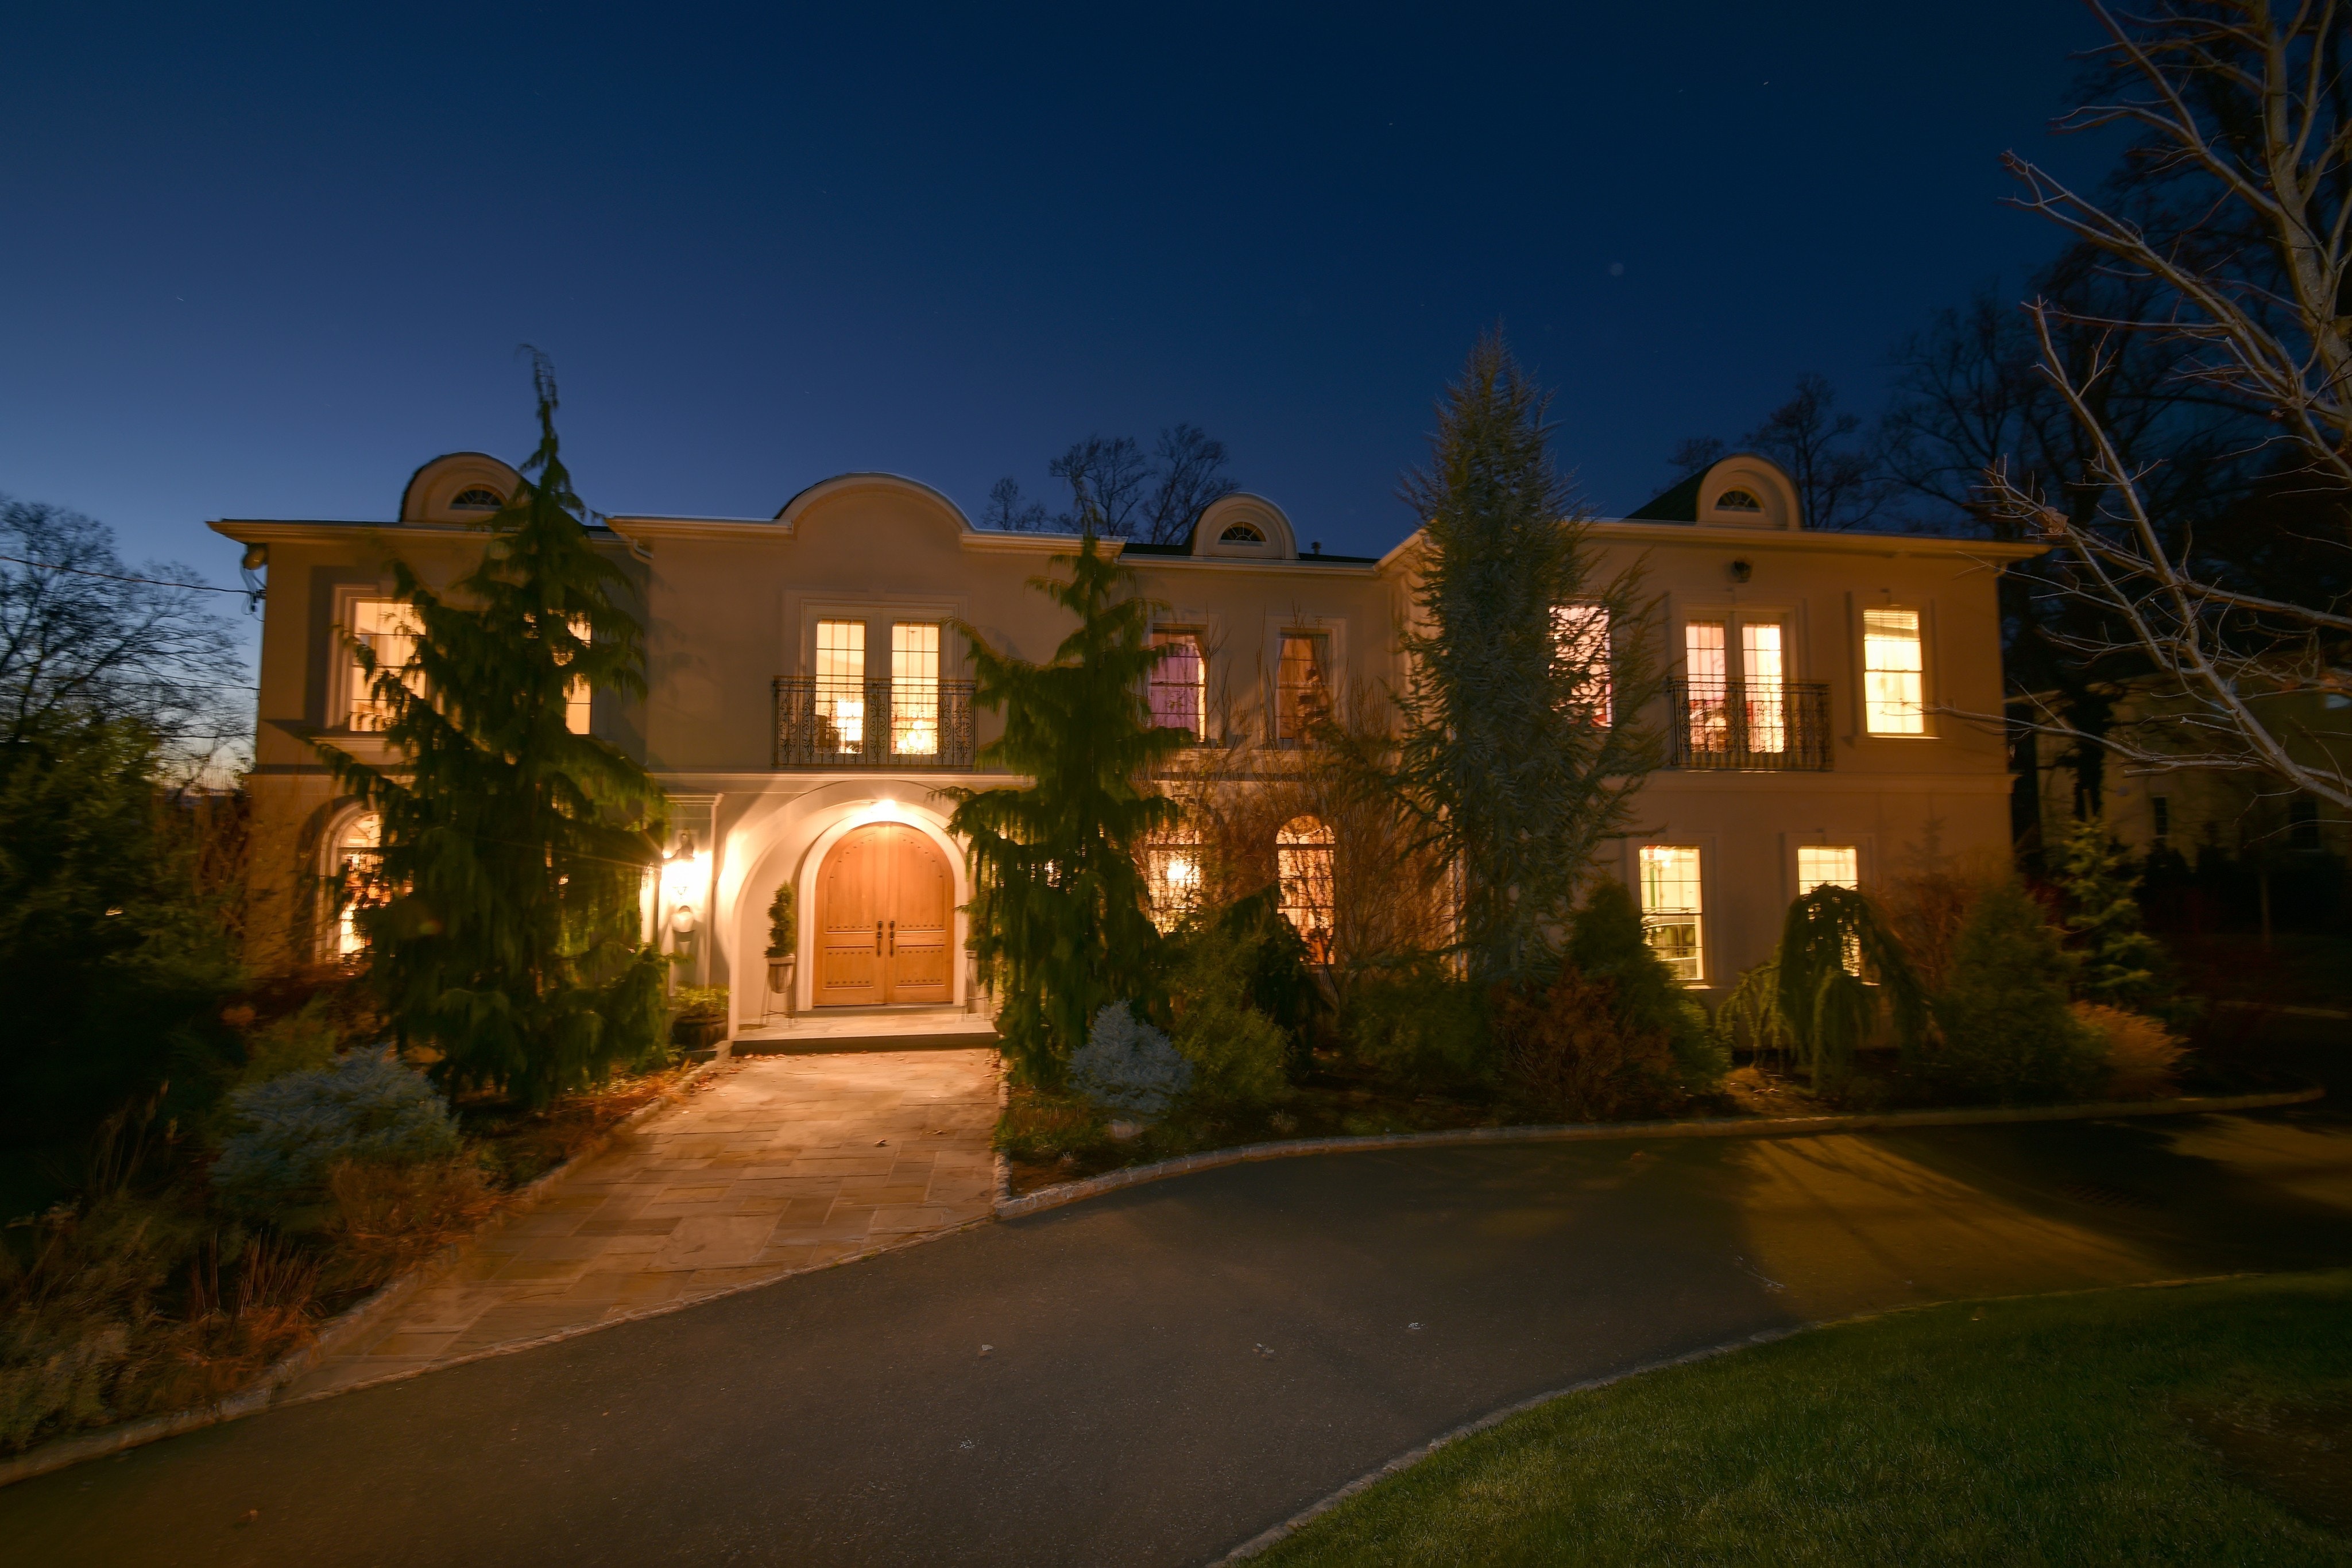 213 engle st tenafly nj 07670 front house night view 3